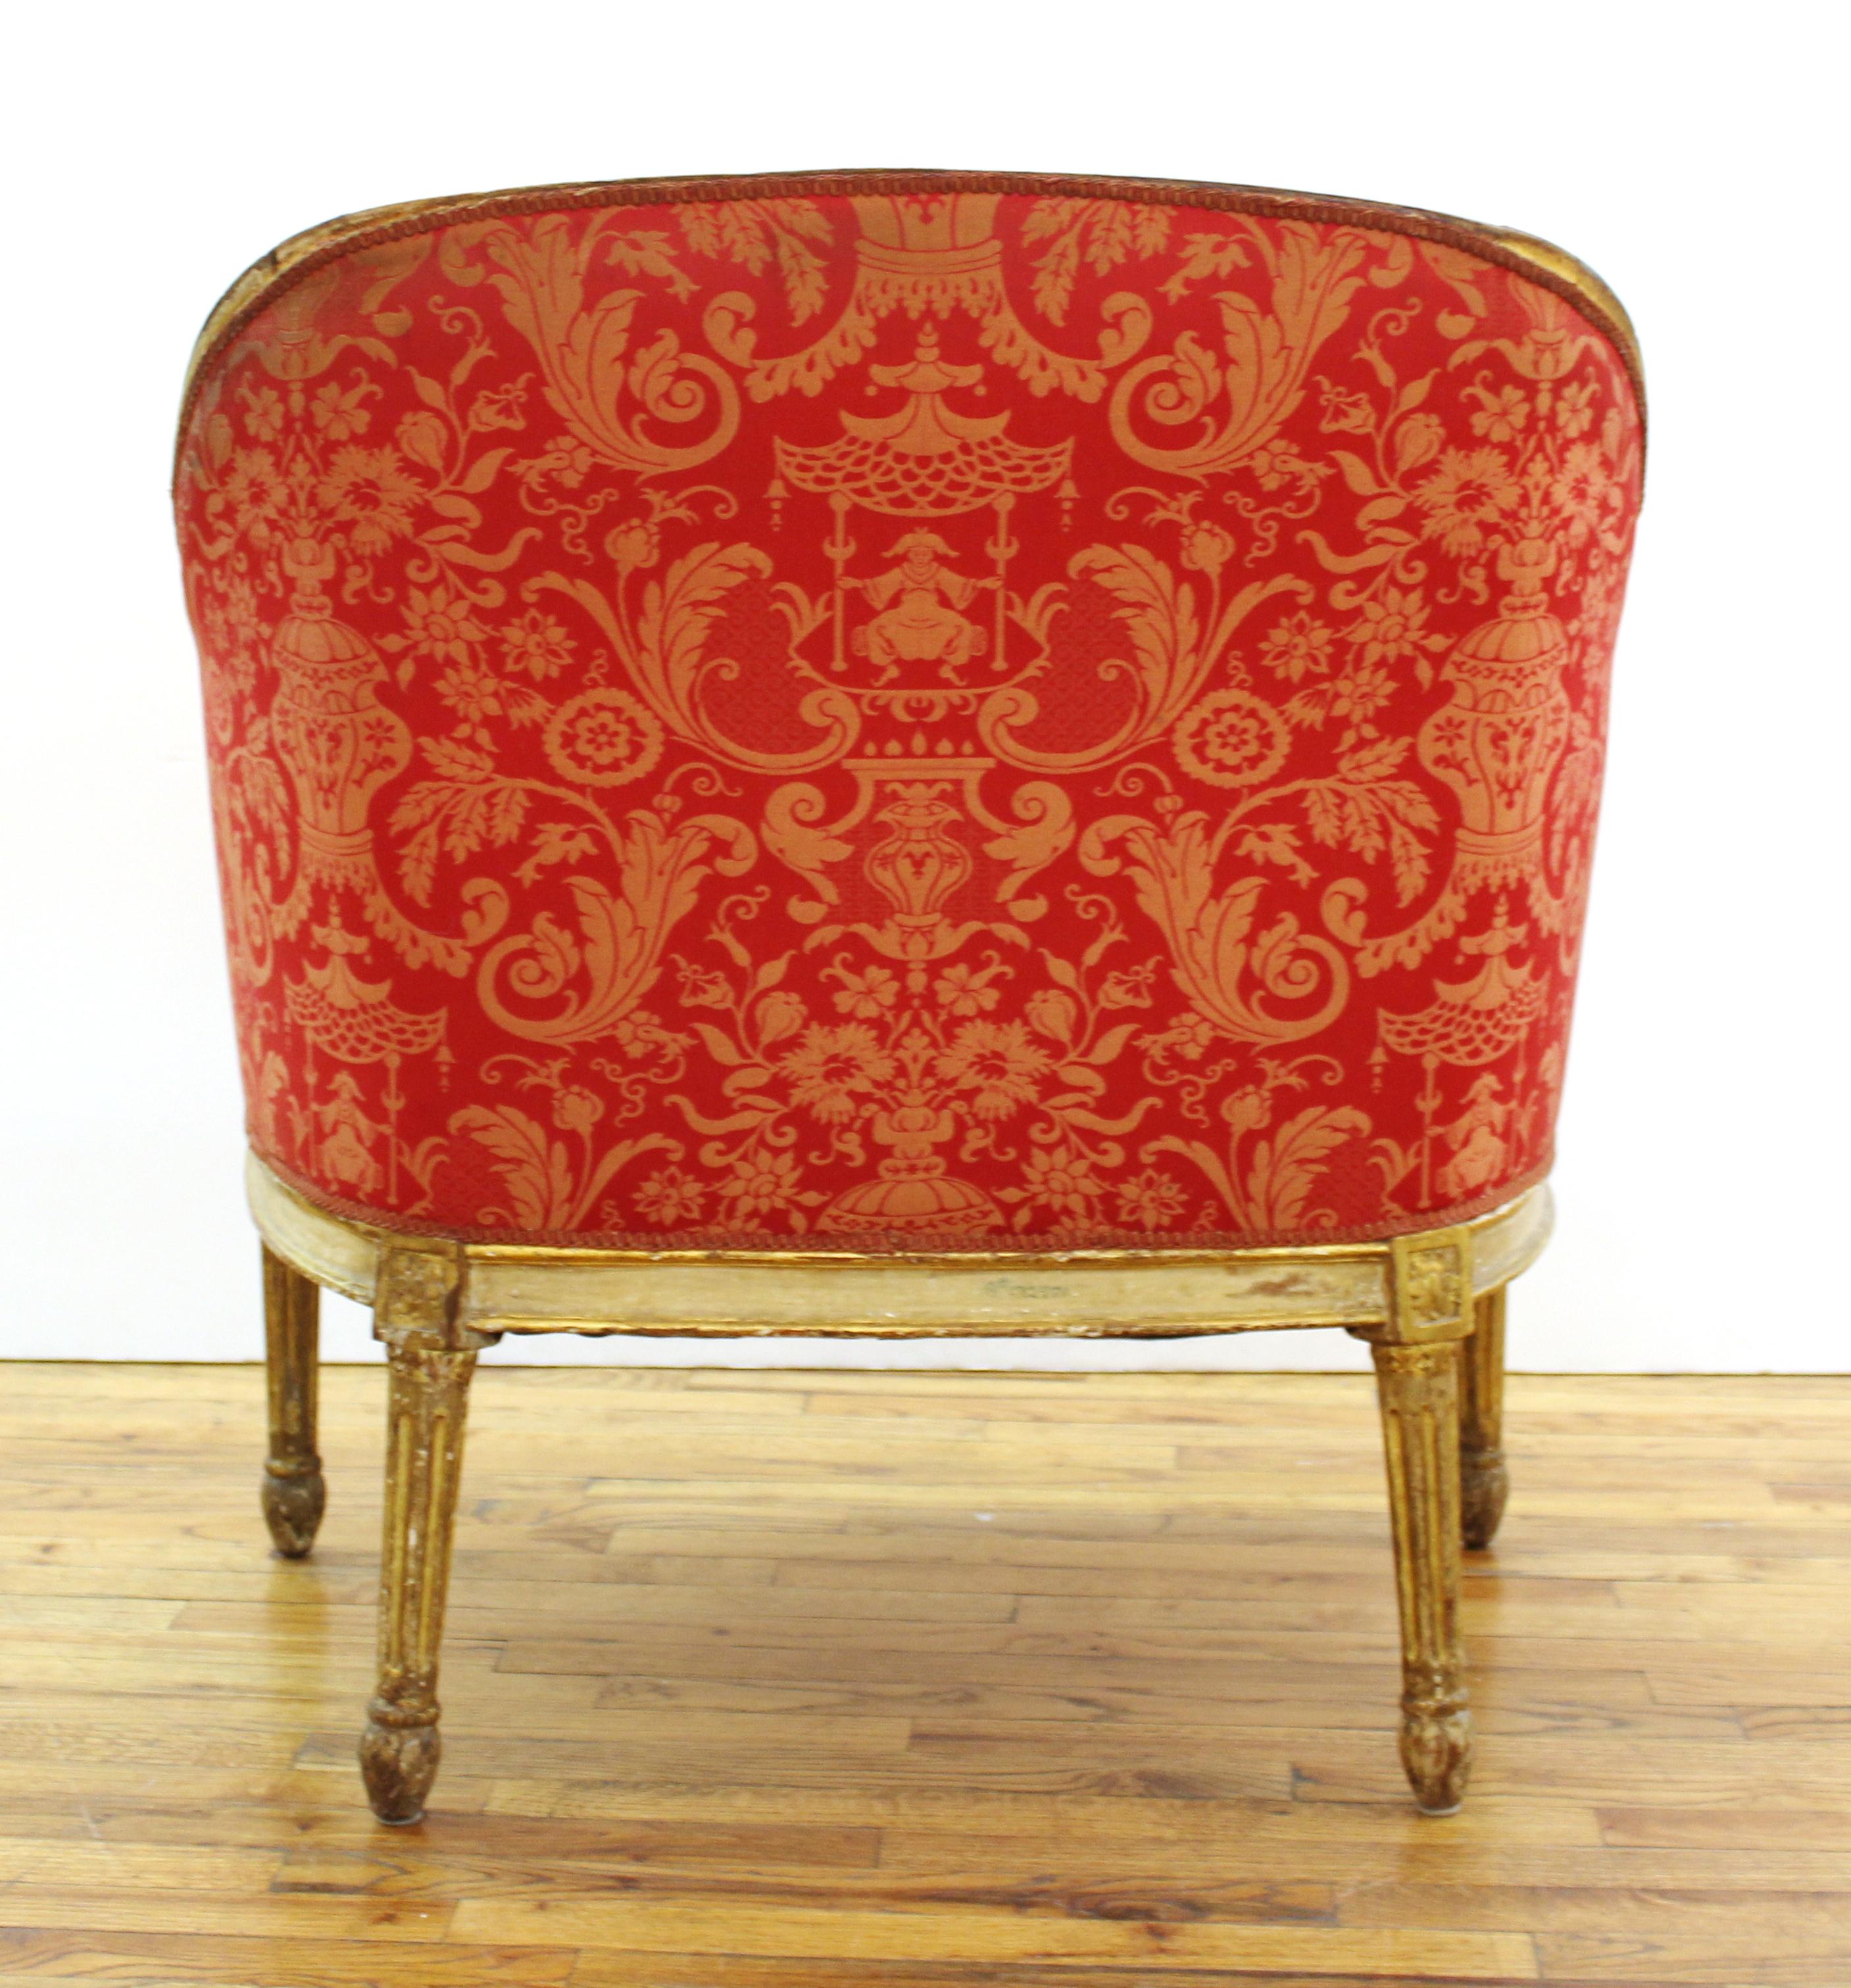 19th Century Louis XVI Style Giltwood Fauteuil with Damask Upholstery